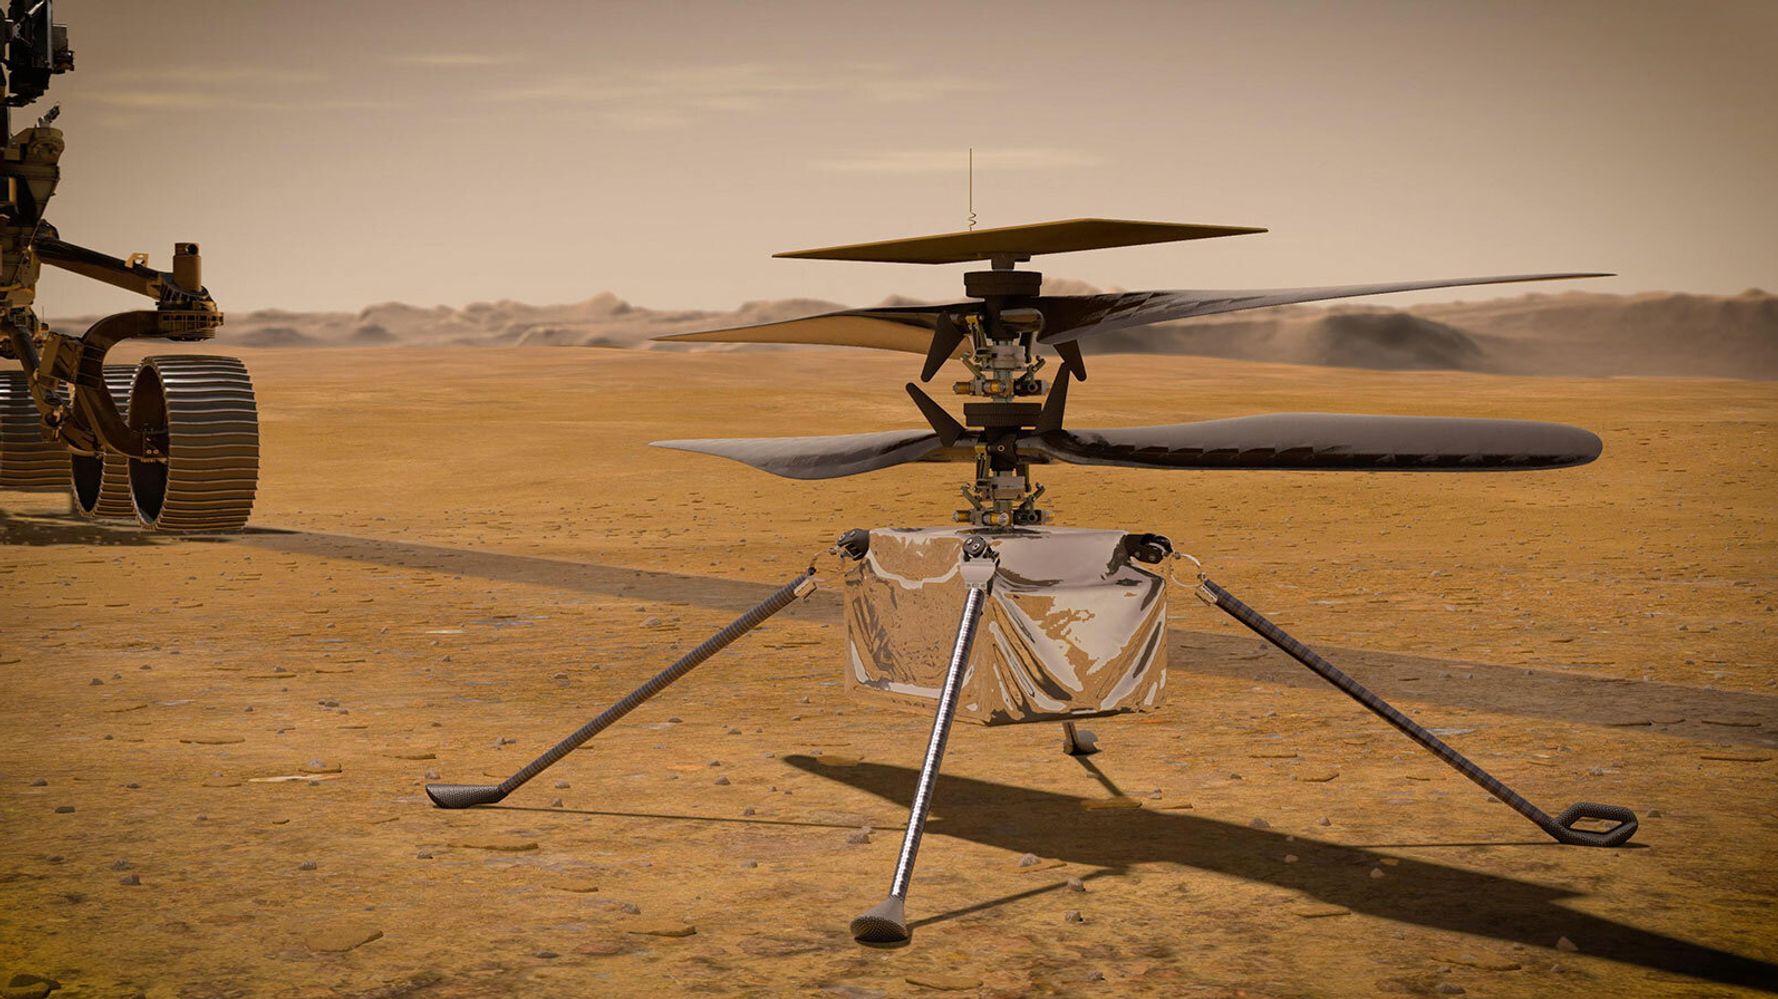 The Wright brothers’ first plane is now on Mars